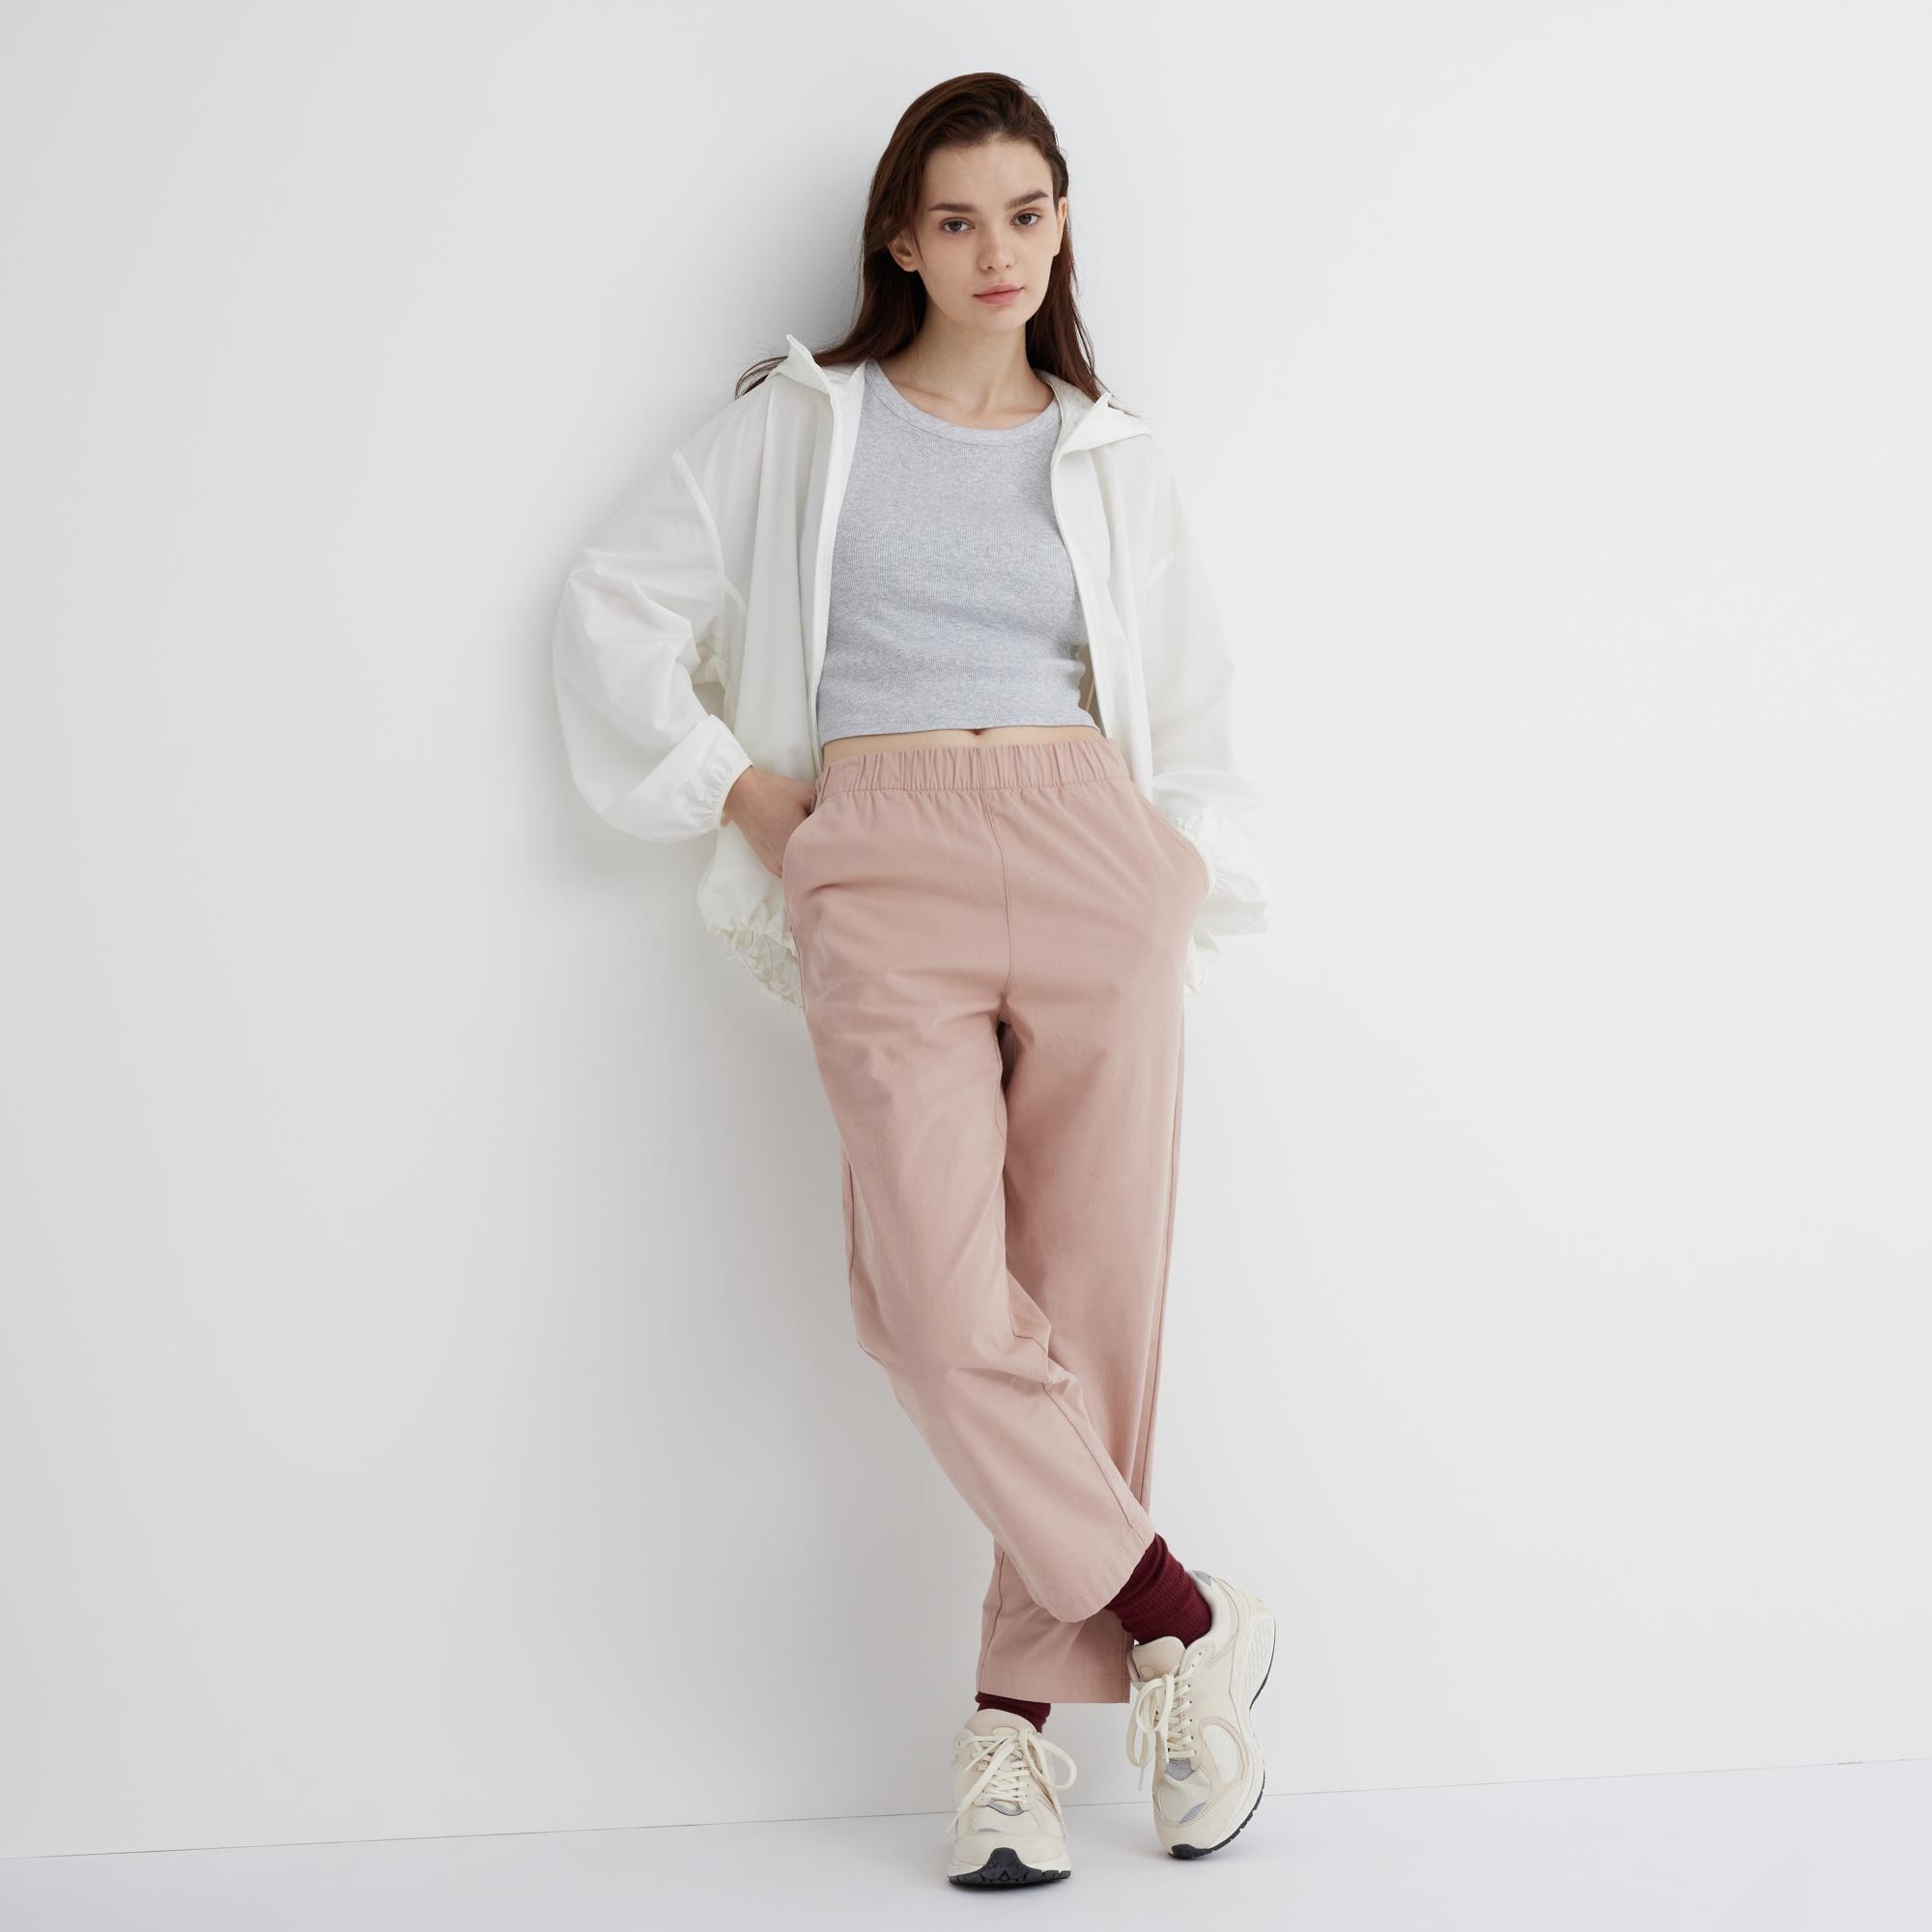 Introducing the ✨new version✨ Cotton Relax Ankle Pants – your go-to for  both indoor and outdoor comfort. Crafted from 100% cotton